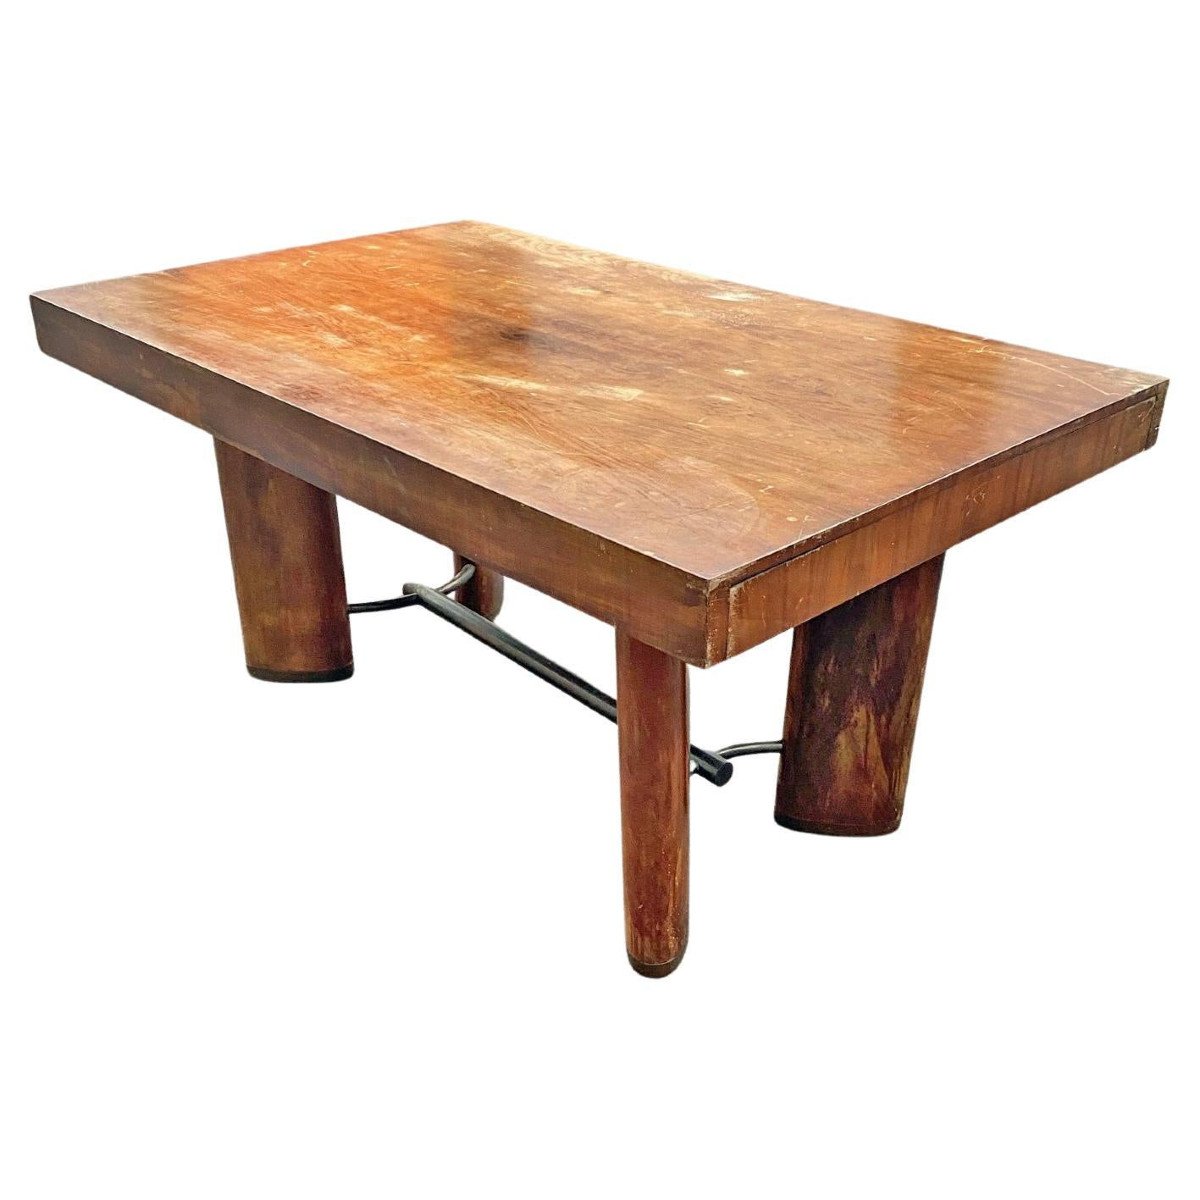 Modernist Art Deco Desk Or Table In Walnut, Spacer And Metal Clog, Circa 1930